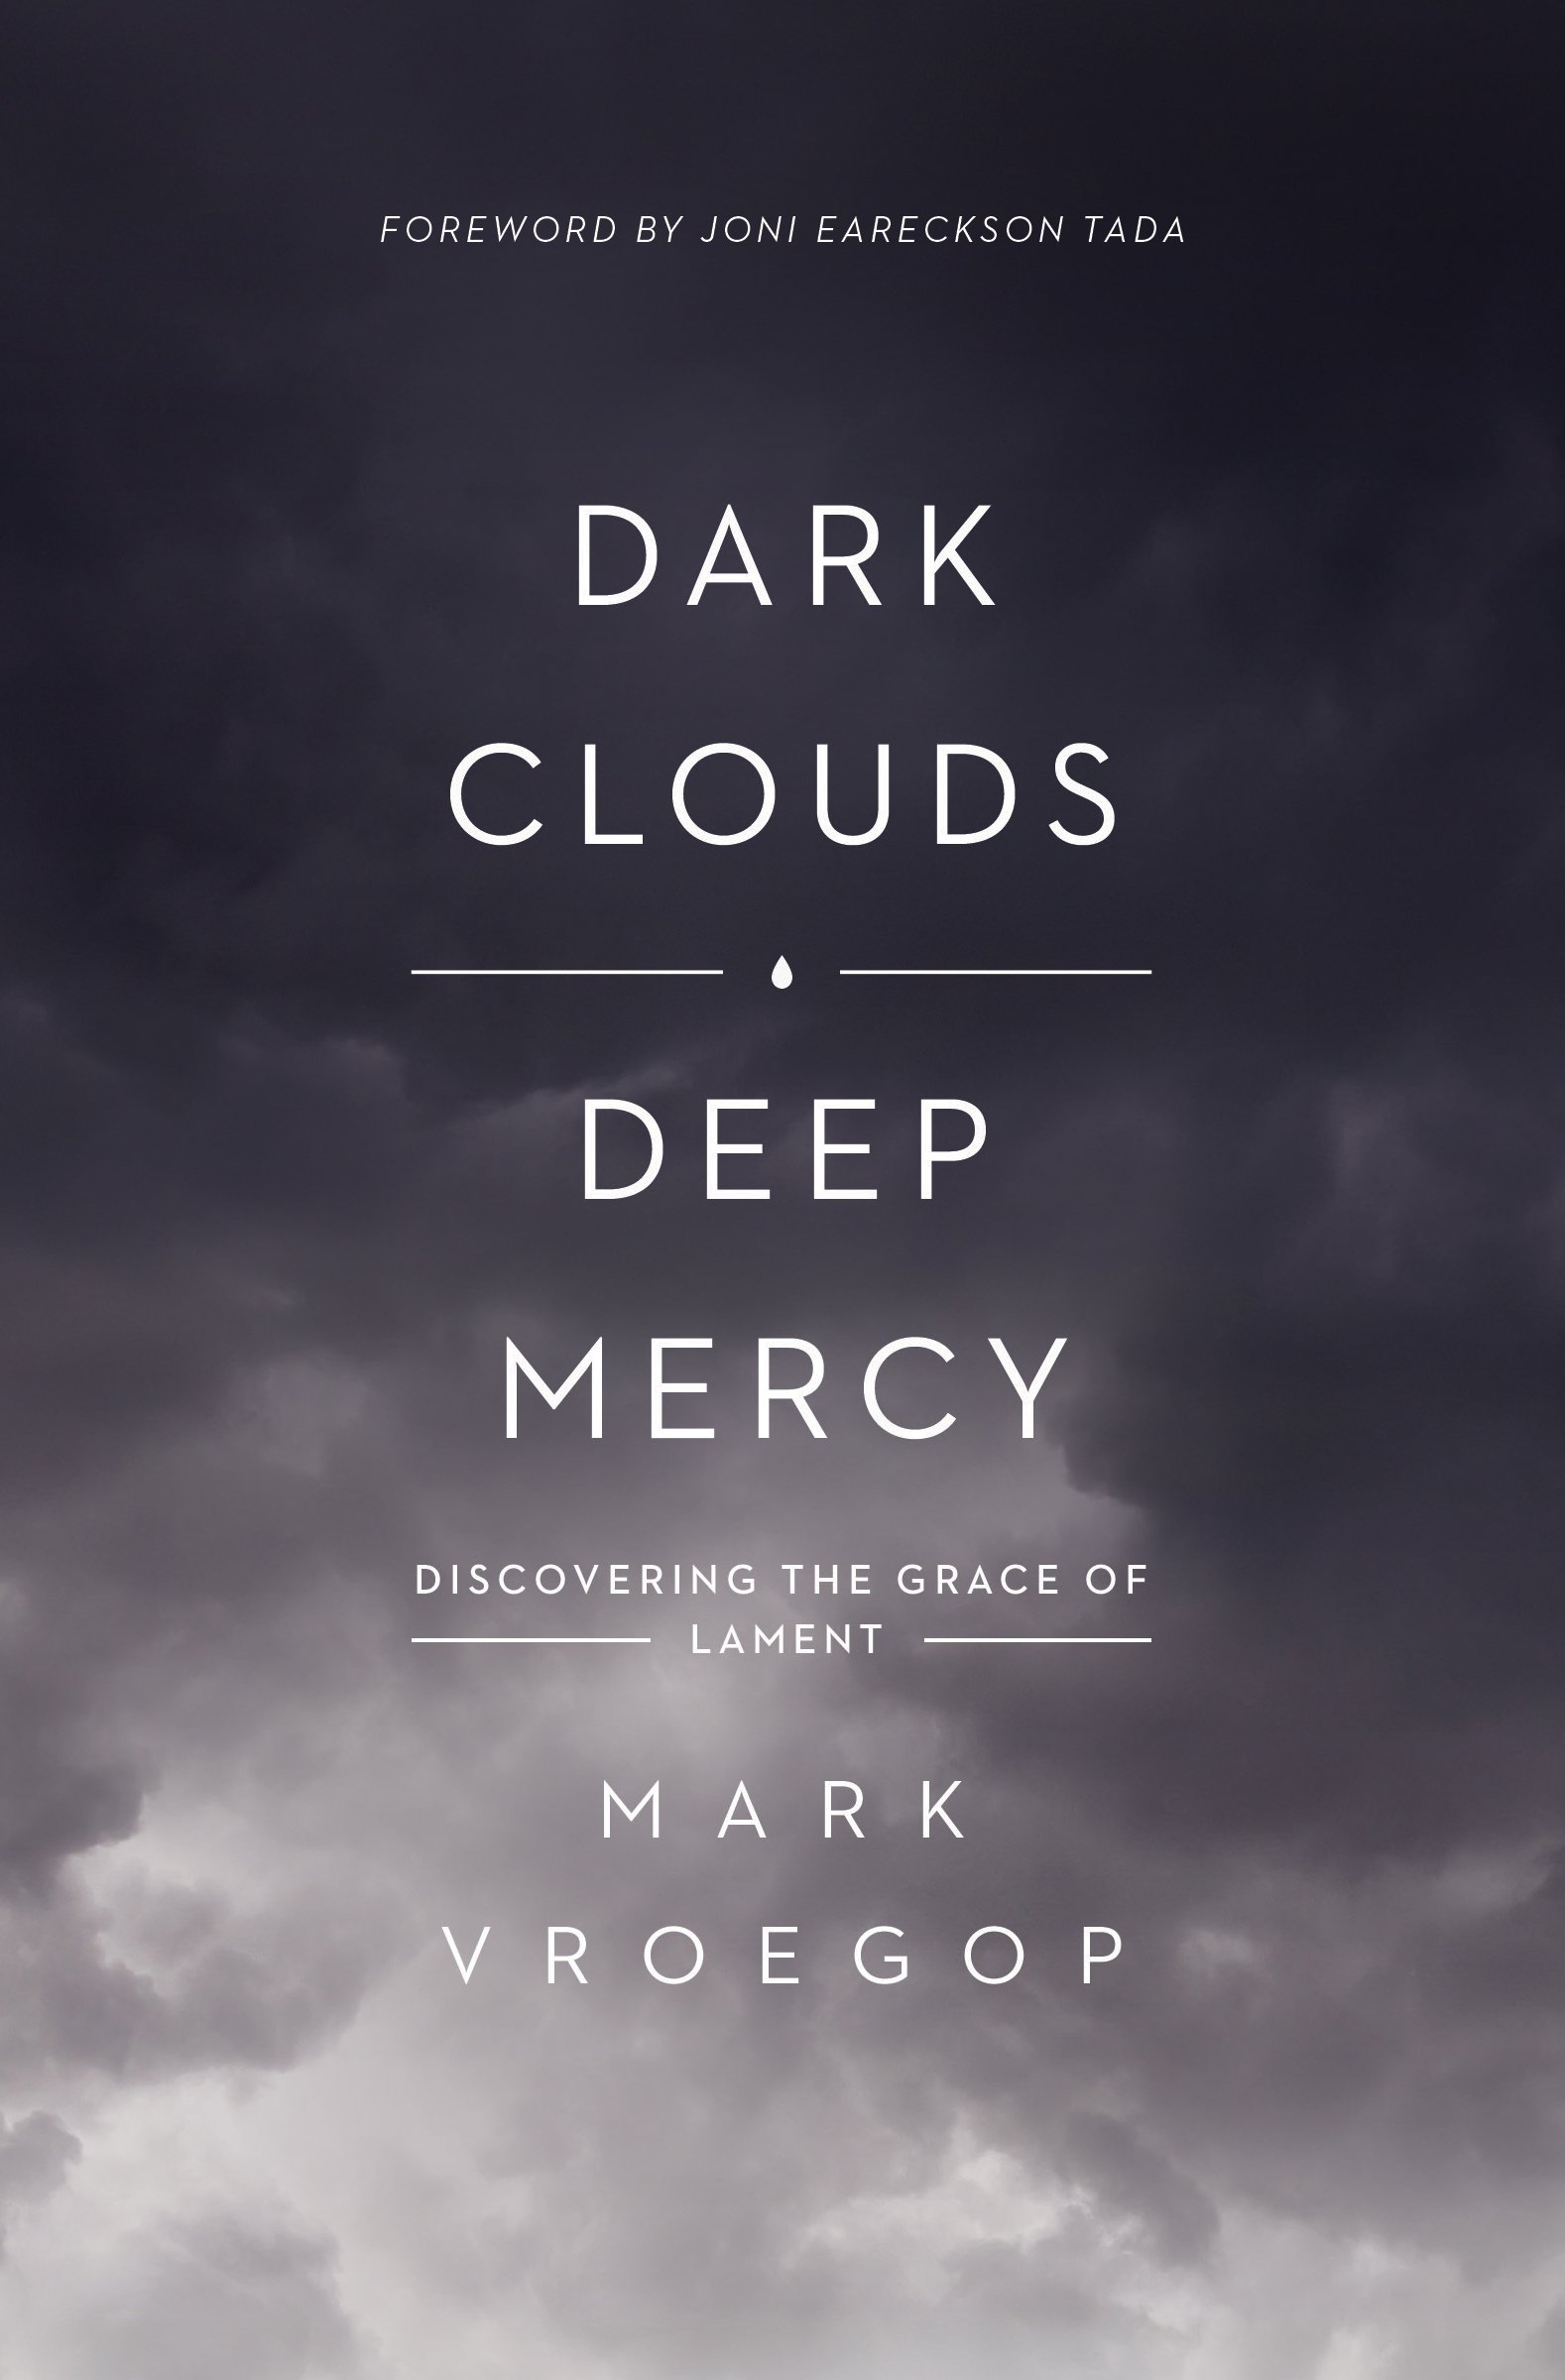 Book Notice: DARK CLOUDS, DEEP MERCY: DISCOVERING THE GRACE OF LAMENT, by Mark Vroegop